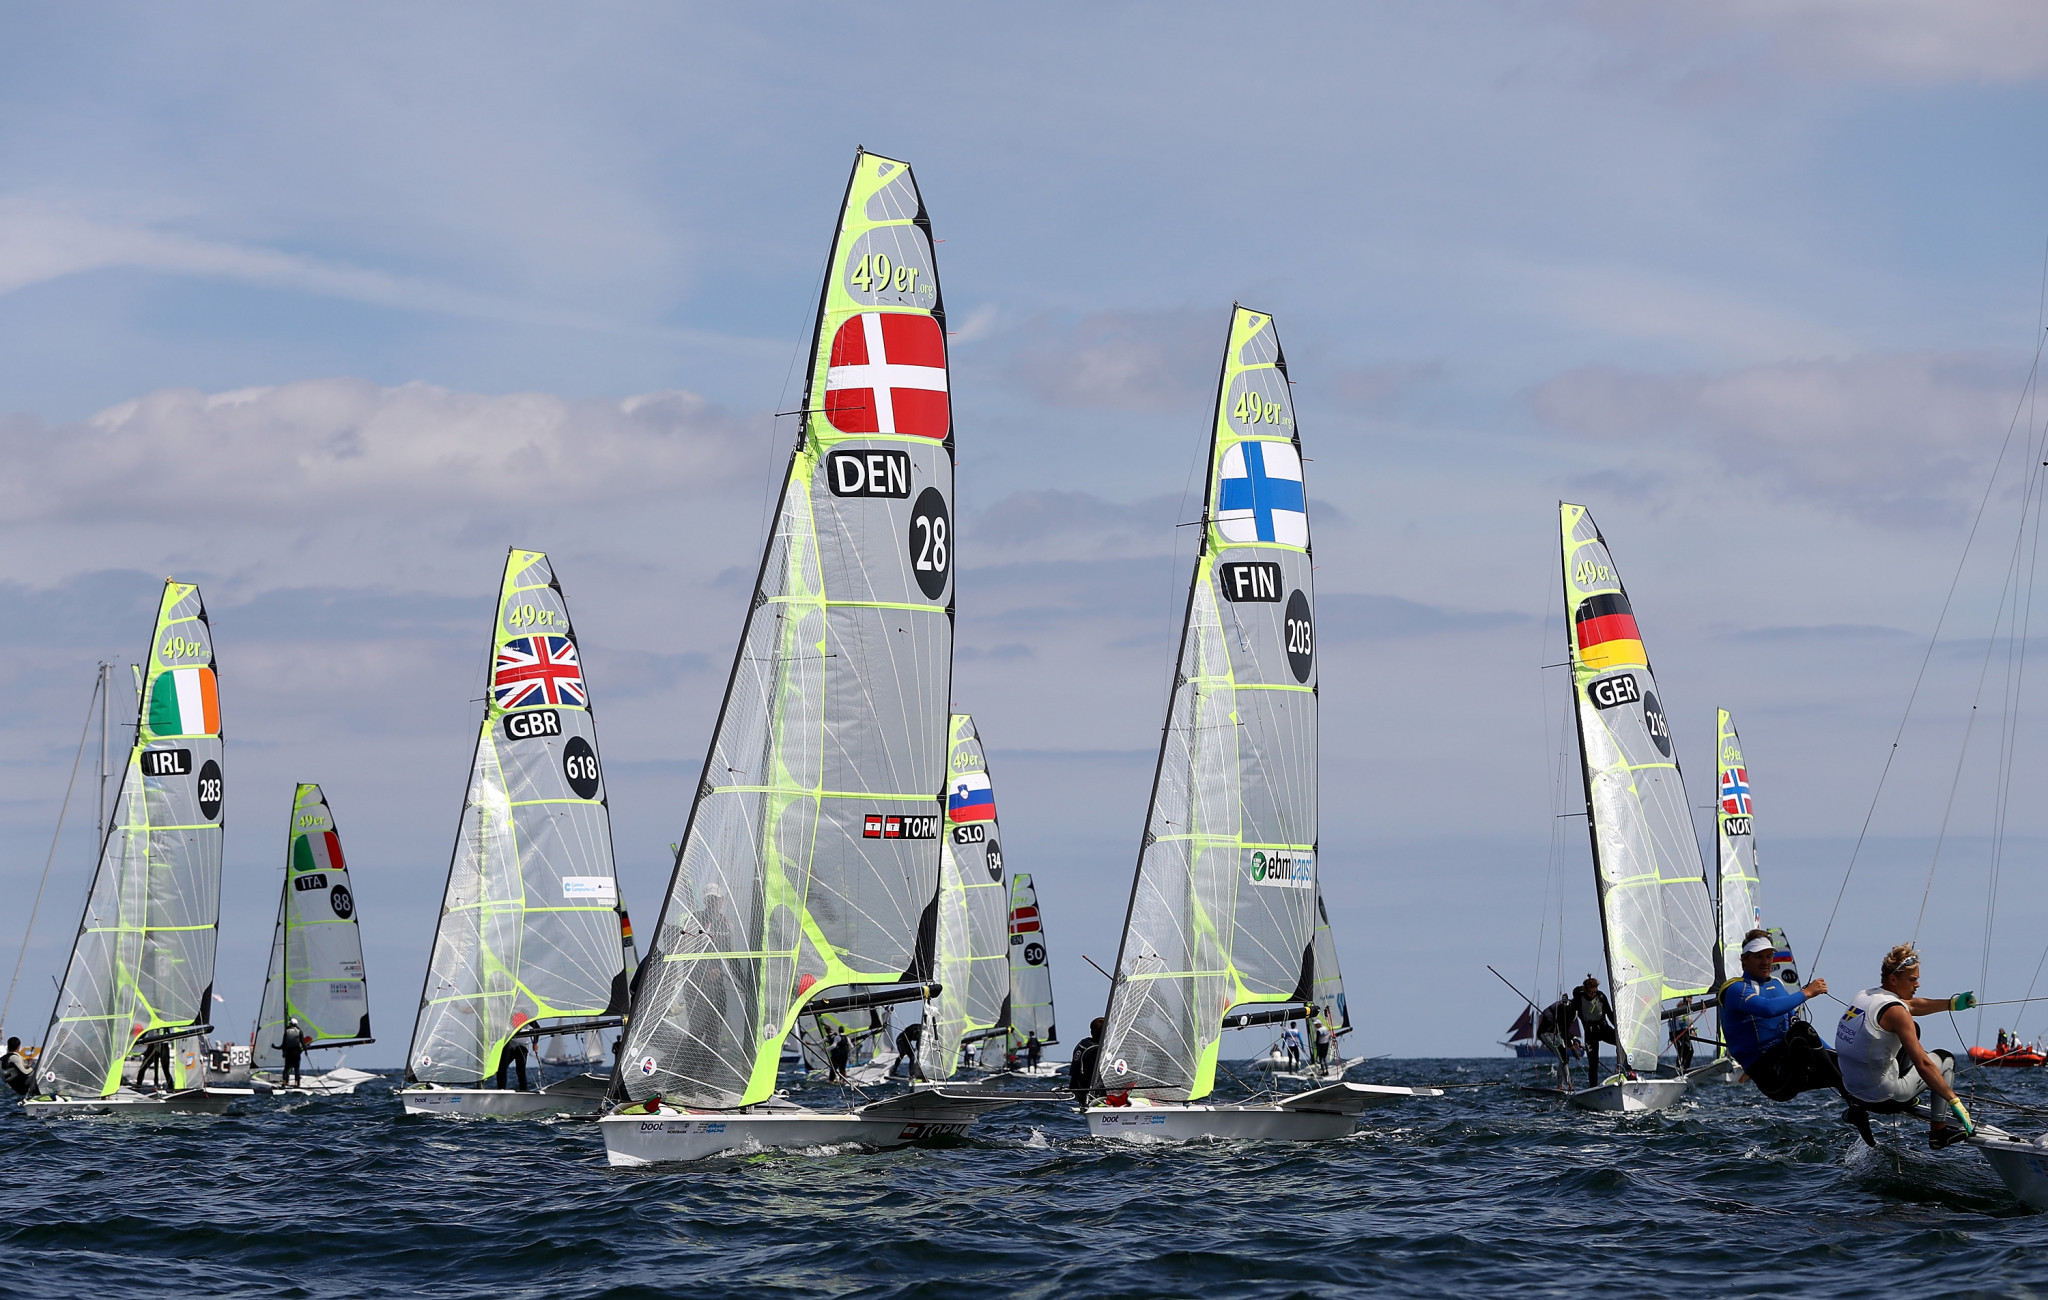 Lima 2019 to feature 49er class after Organising Committee increase sailing athlete quota 